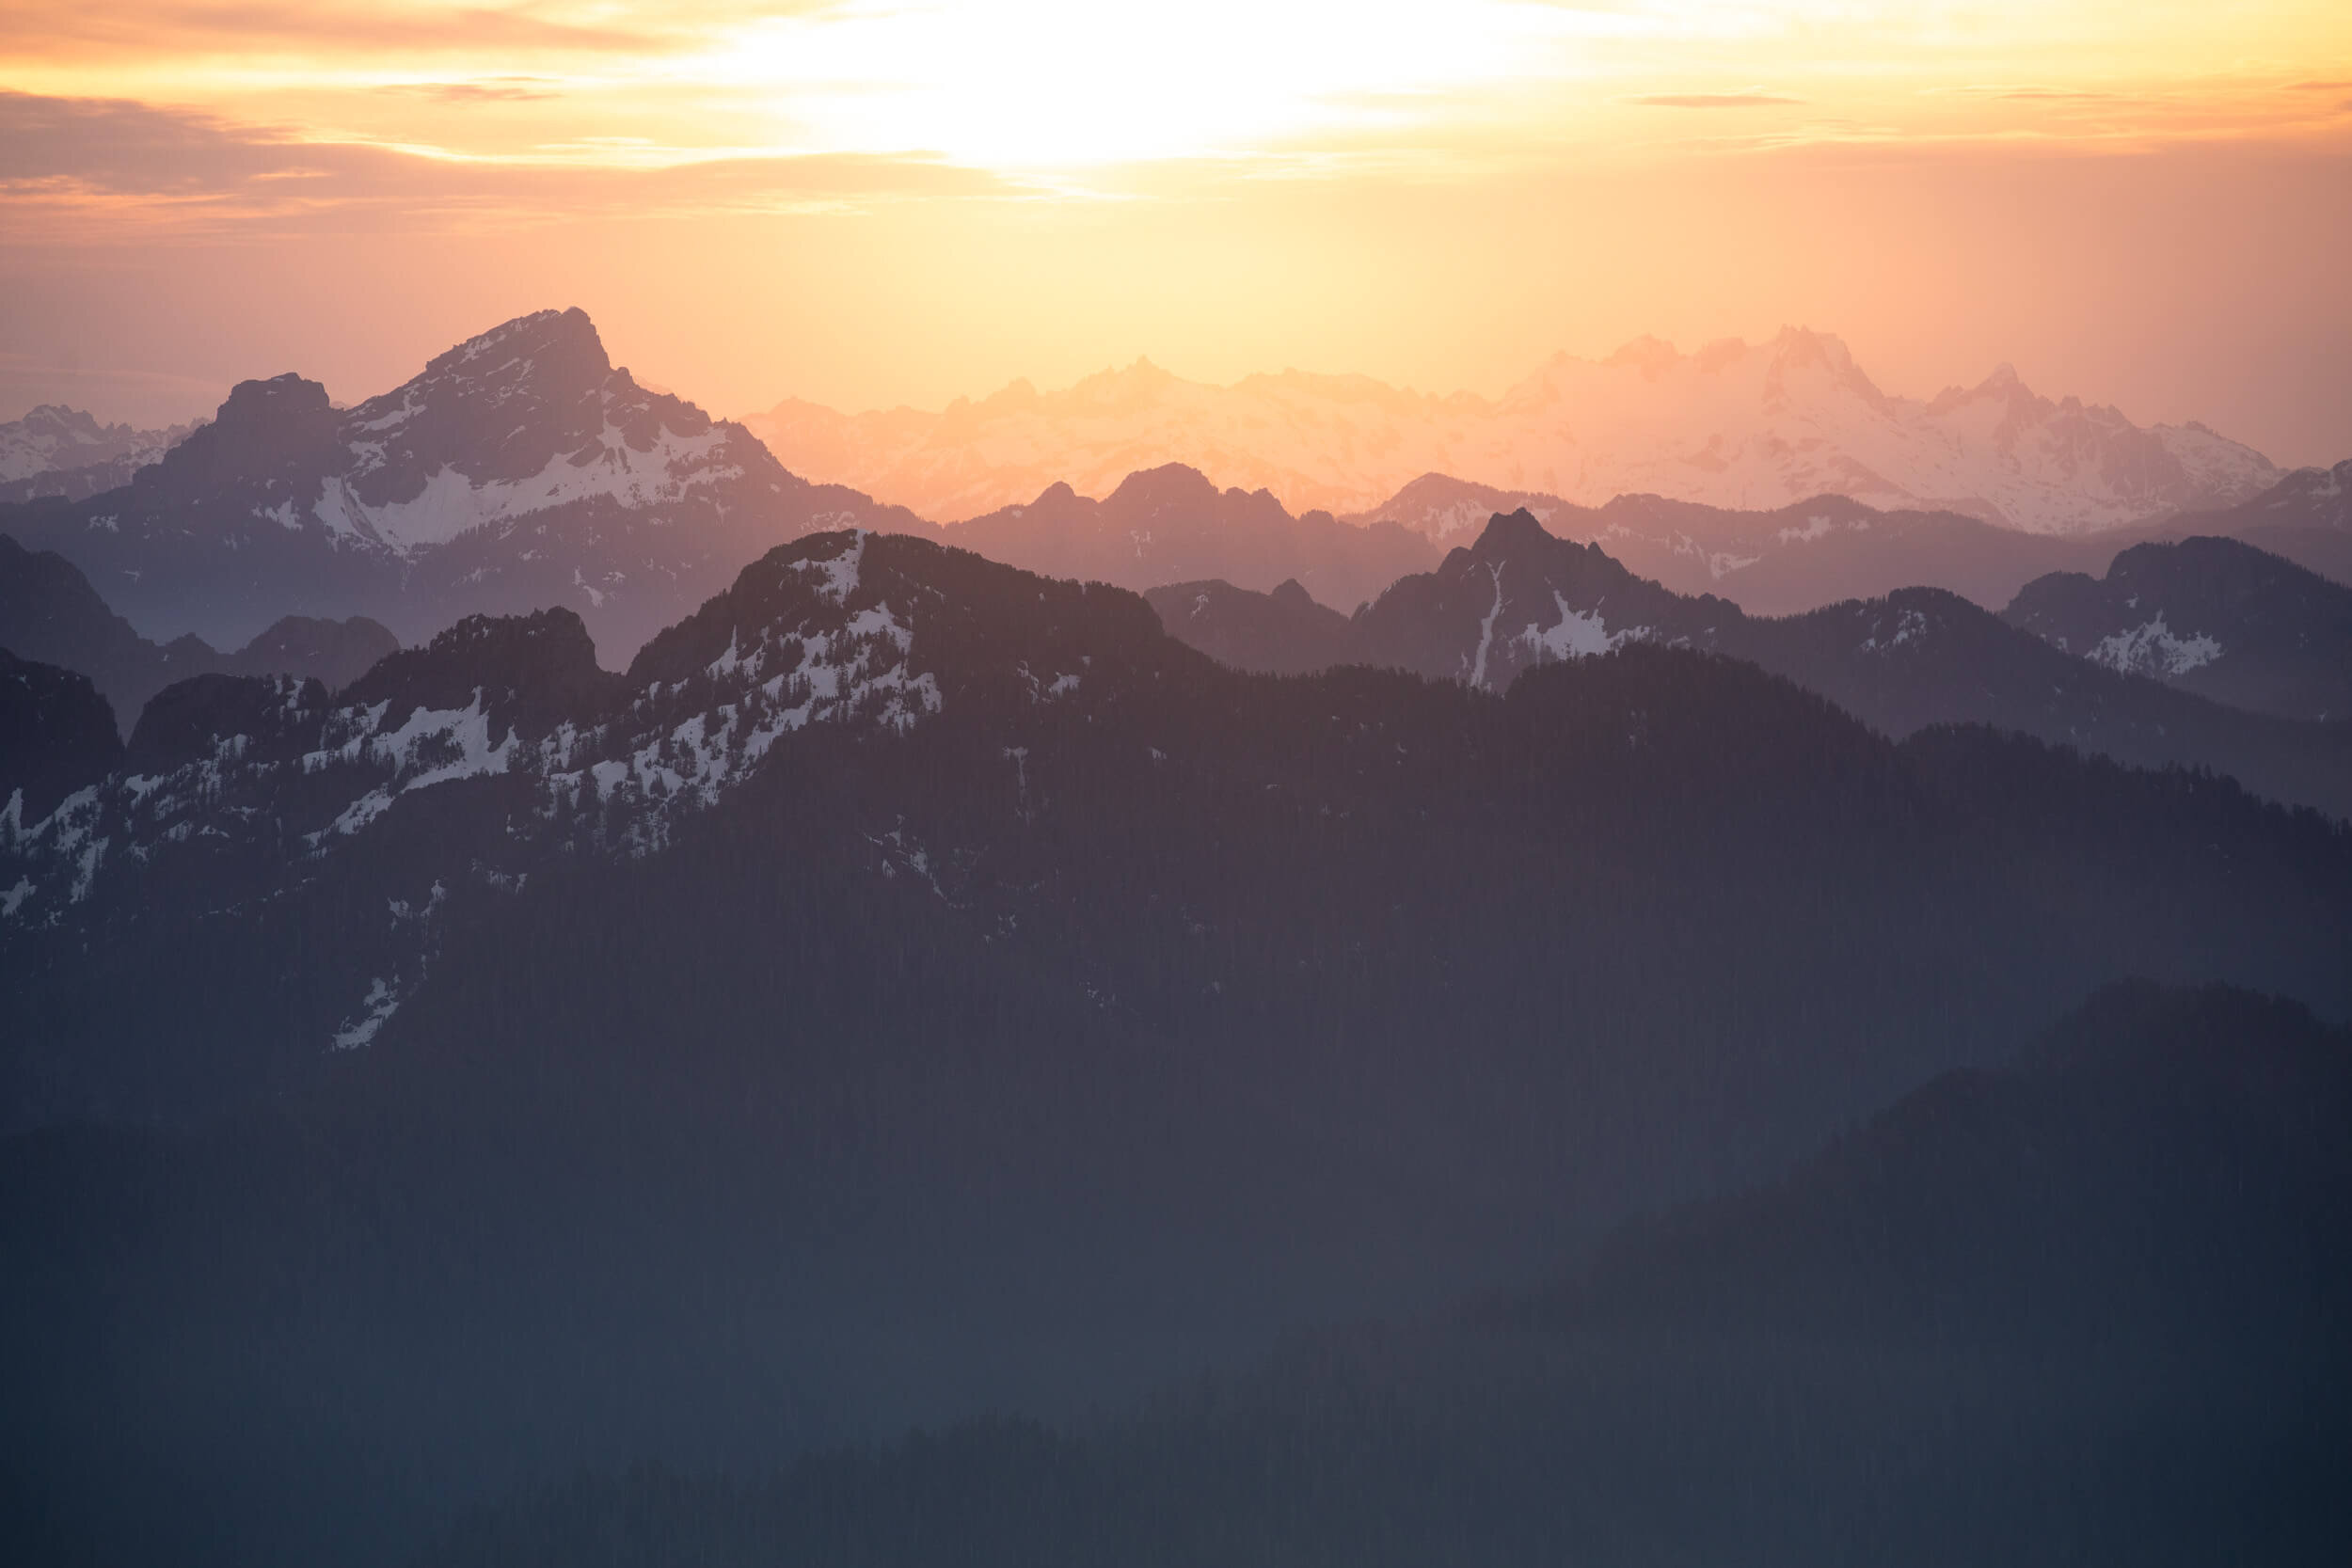 The view at sunset from Pilchuck Lookout in Washington.